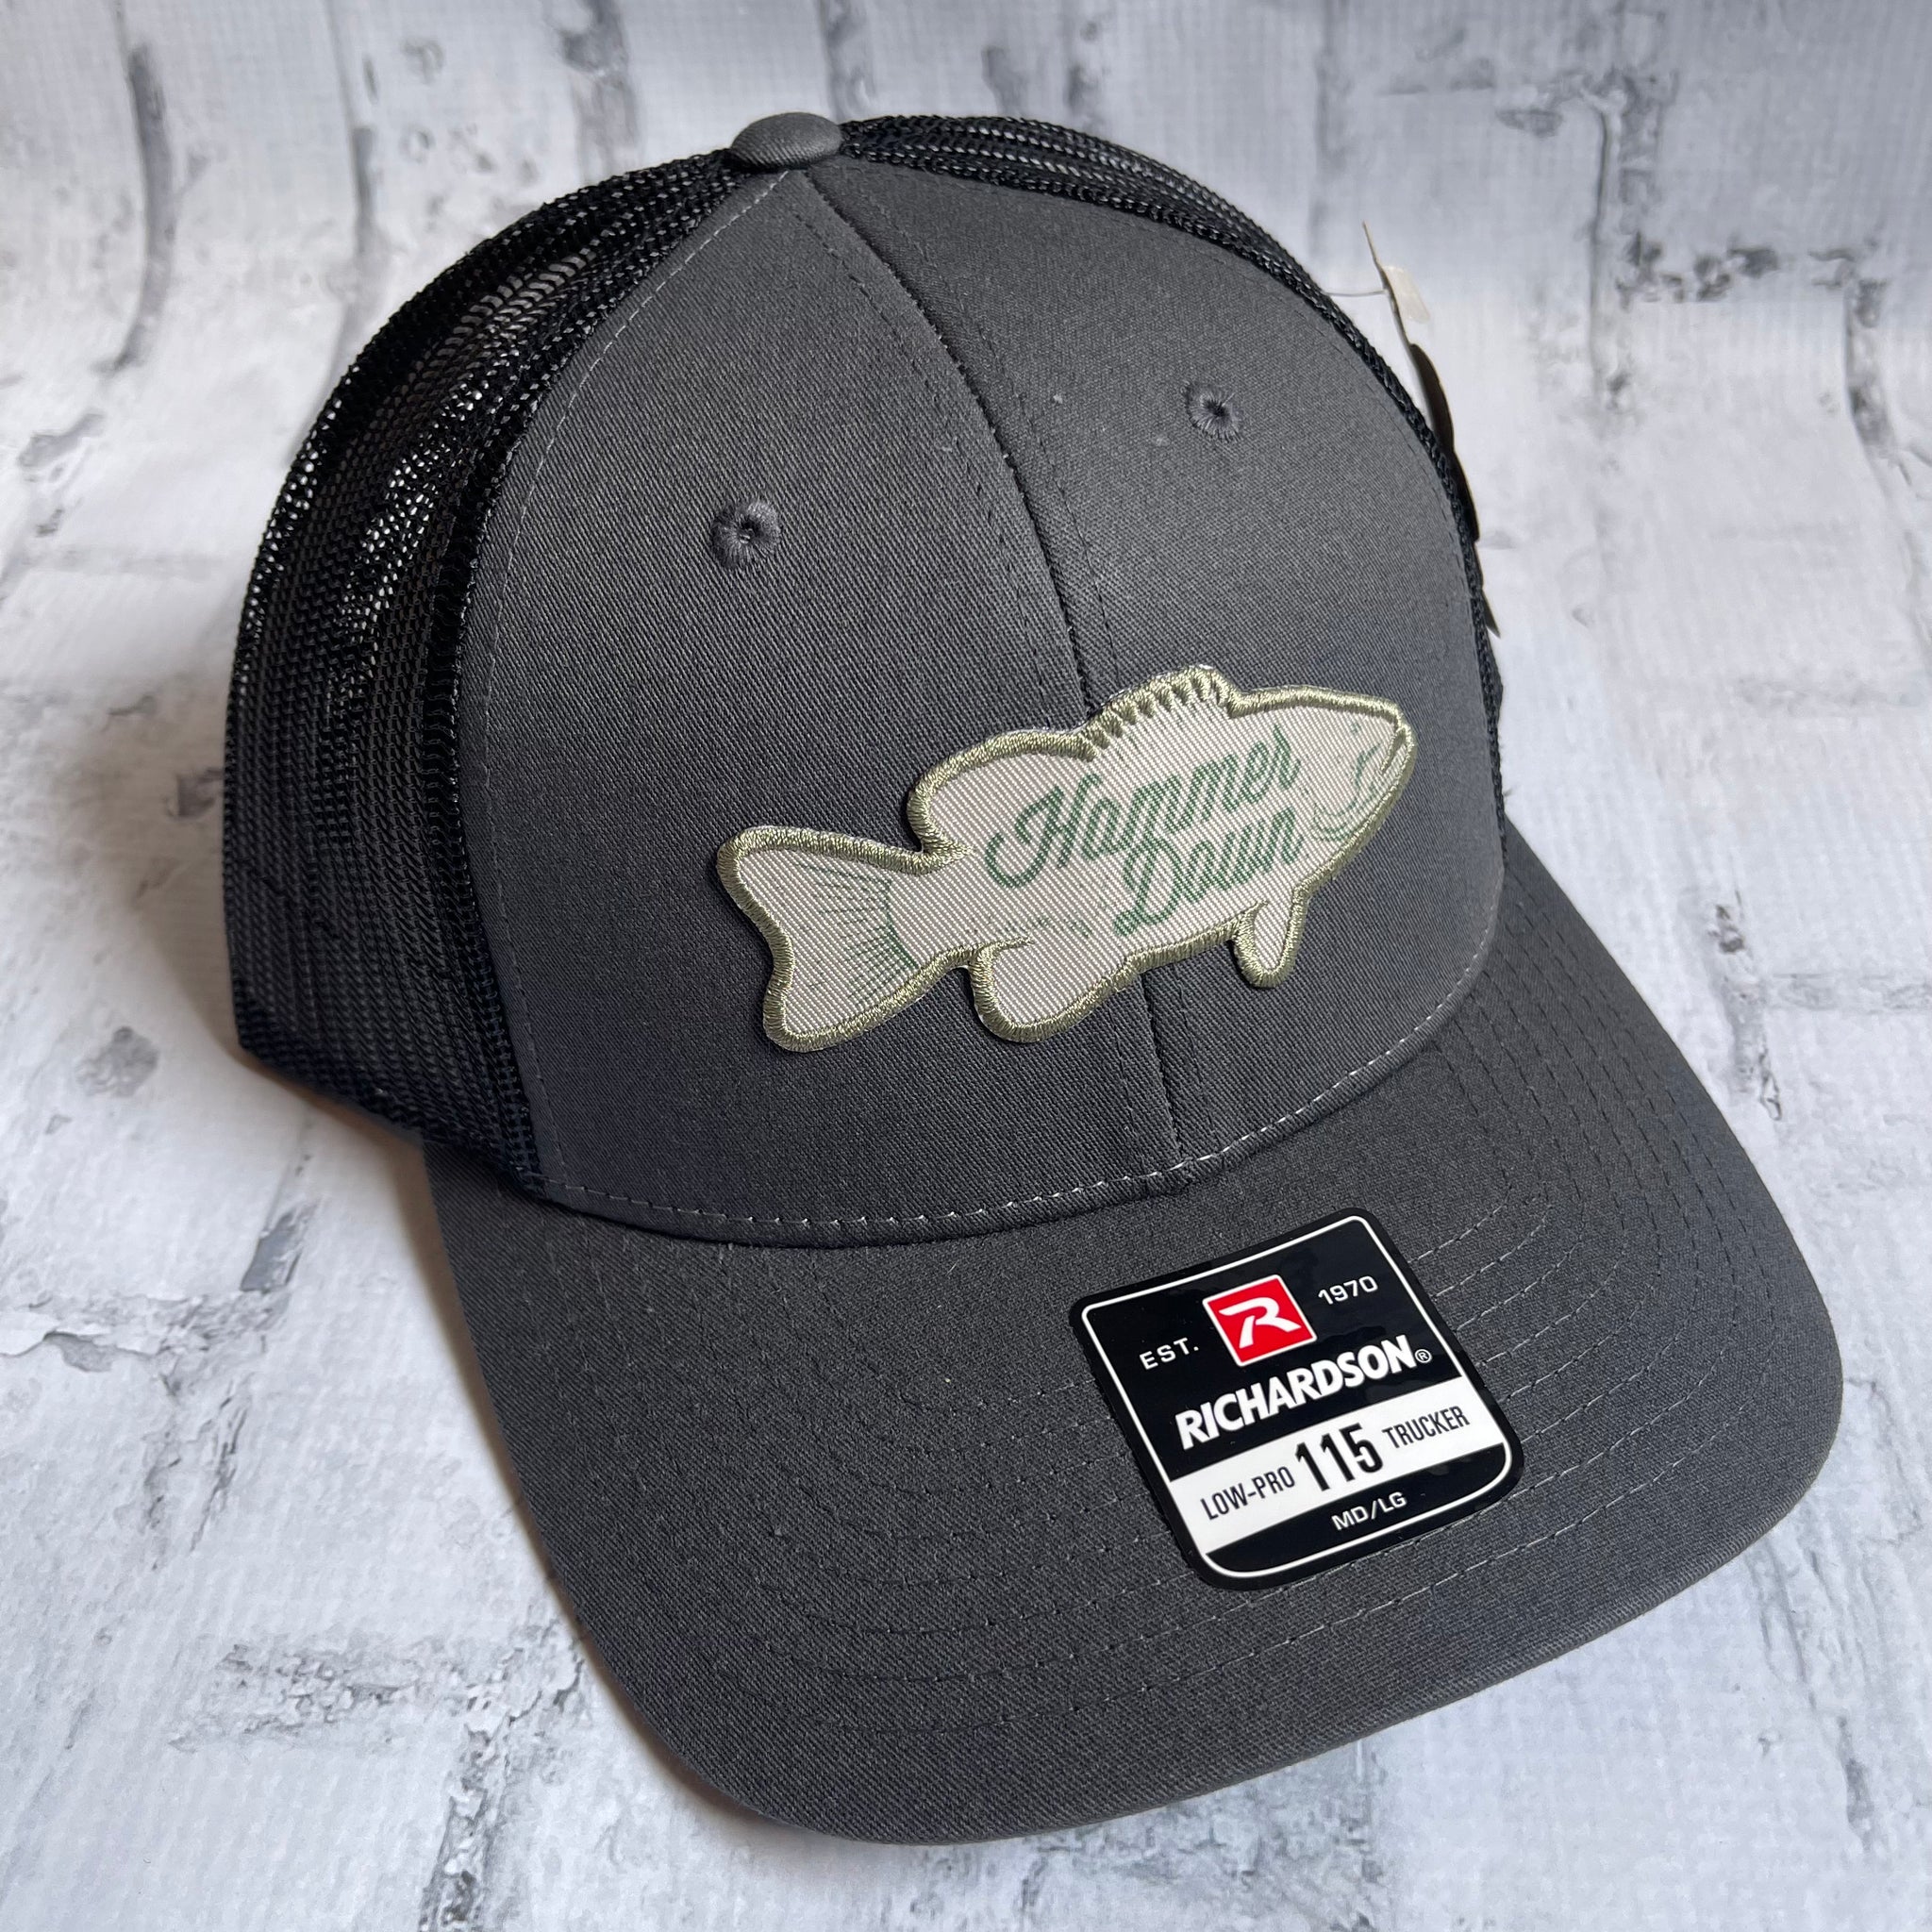 Hammer Down "HD Bass" Hat - Charcoal with Leather Patch - Southern Charm "Shop The Charm"